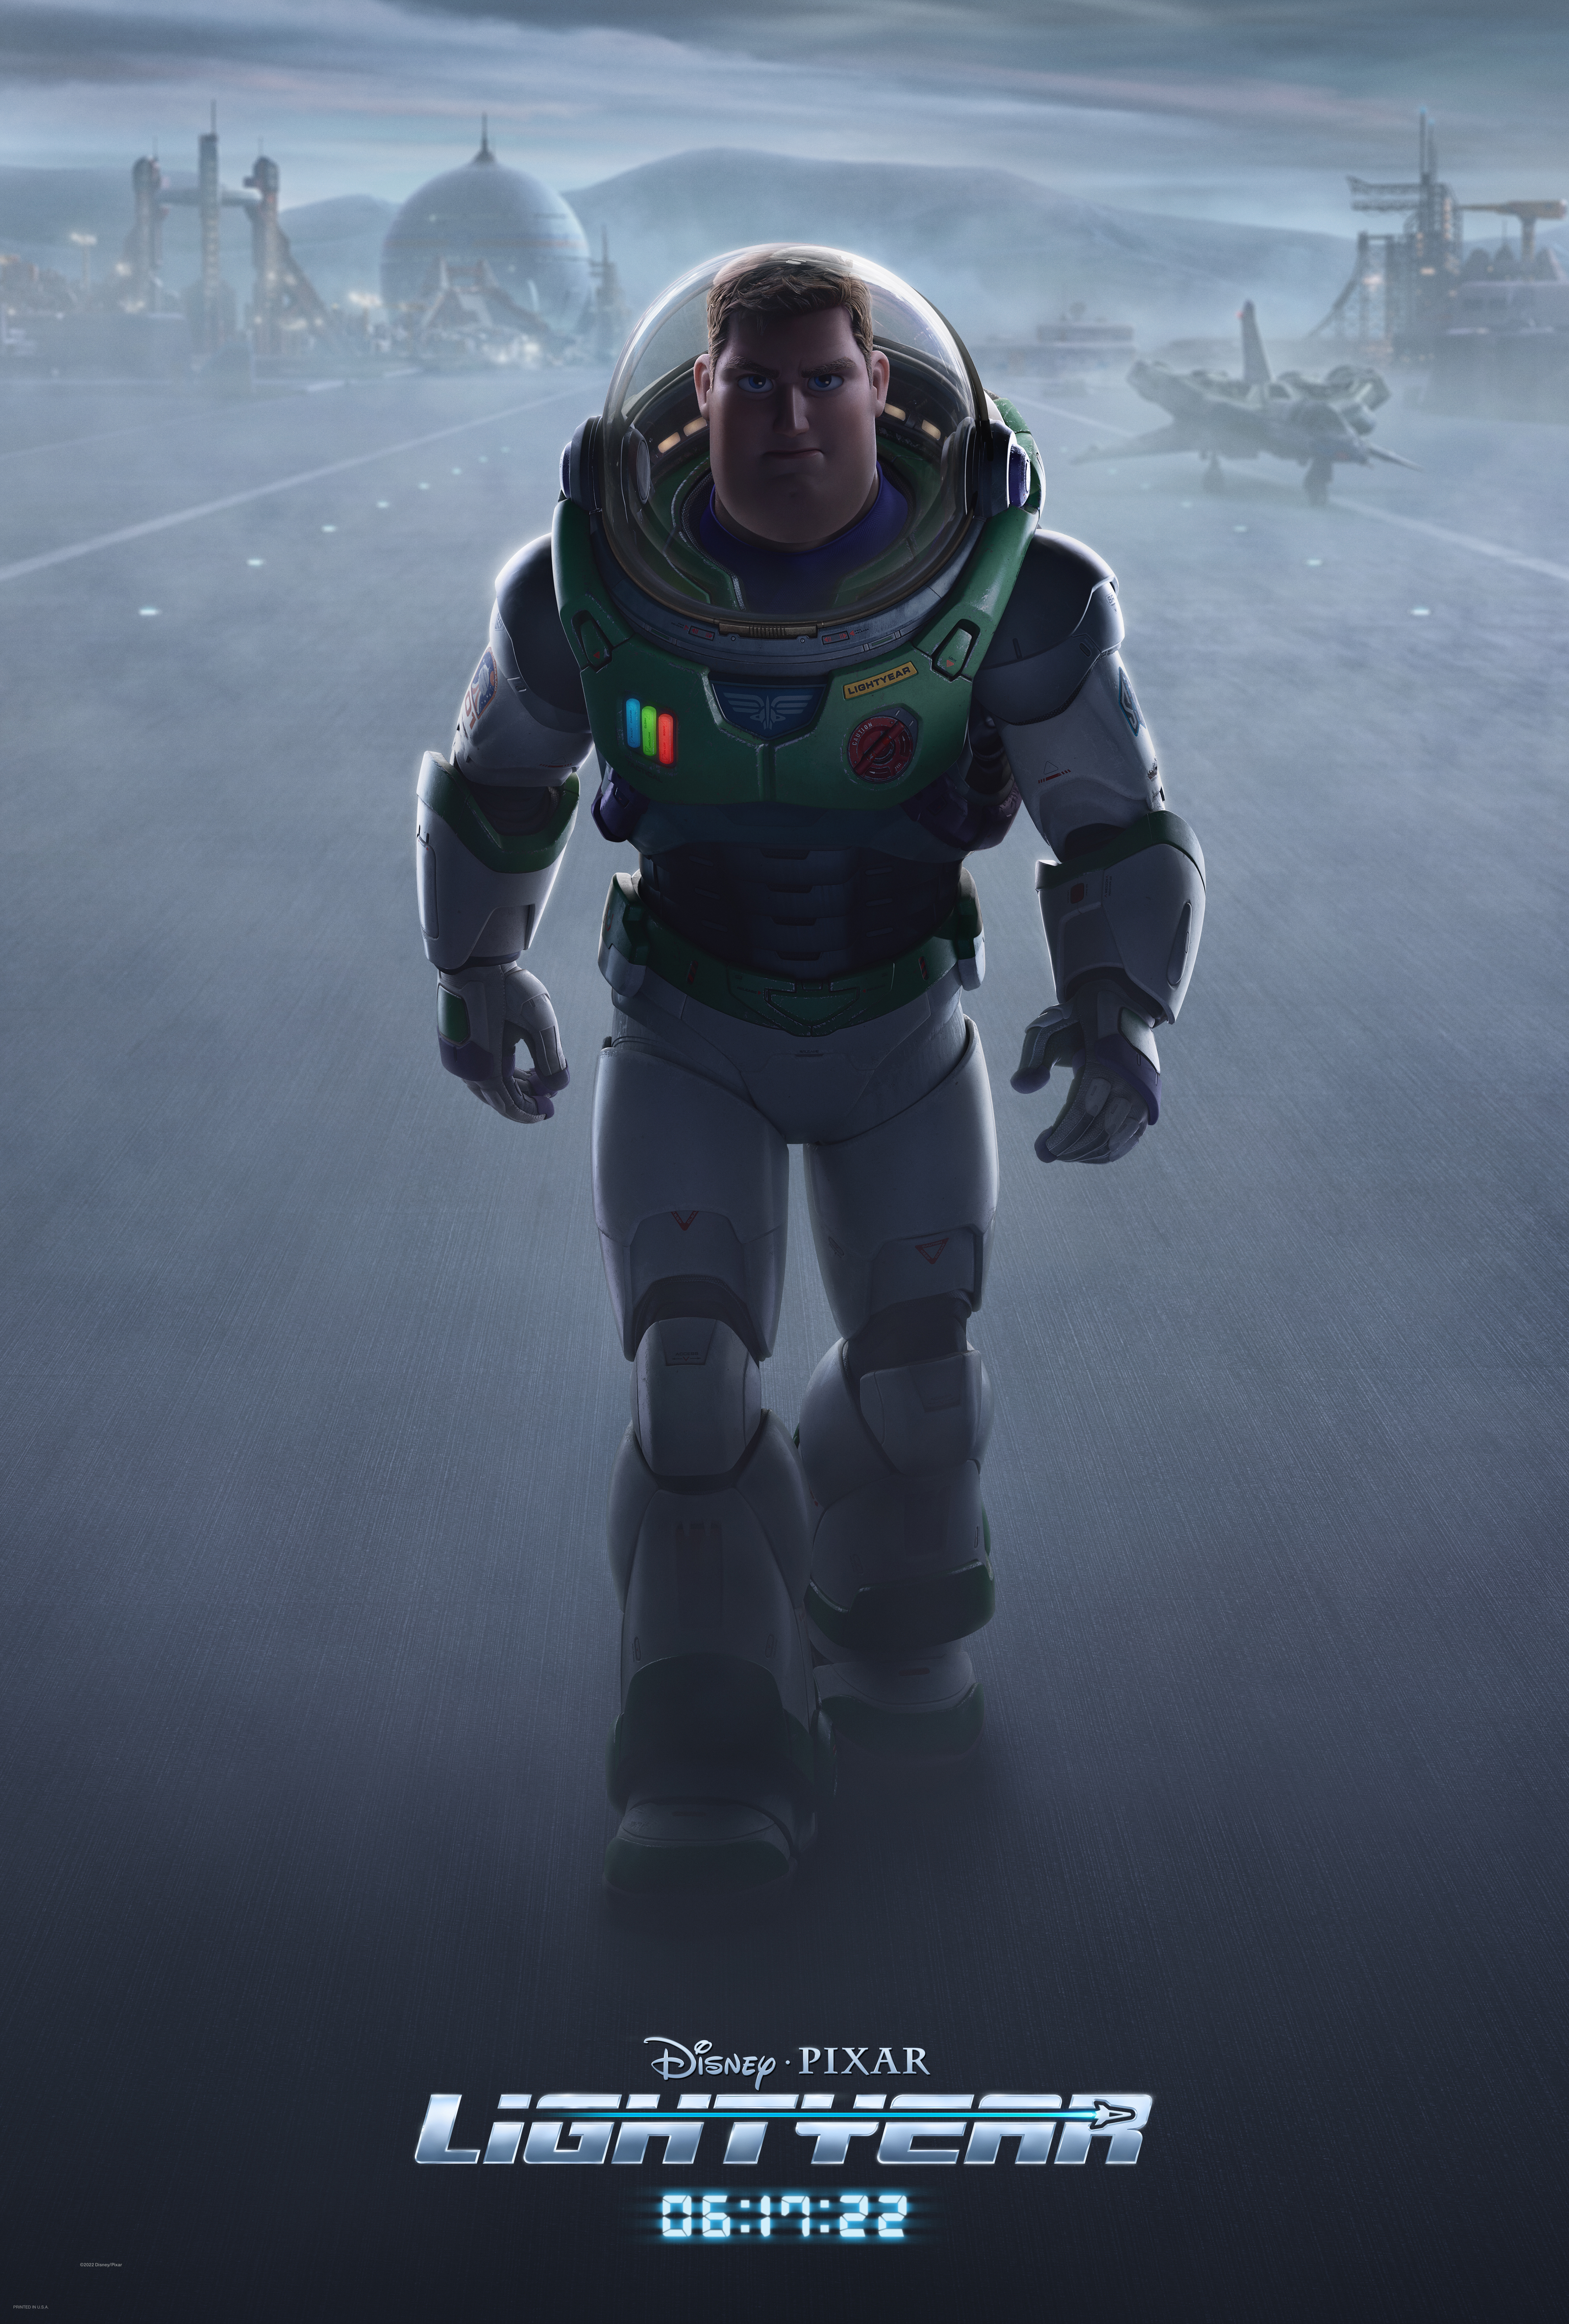 New Movie Trailer and Poster Images for Disney Pixars Lightyear 4051x6000